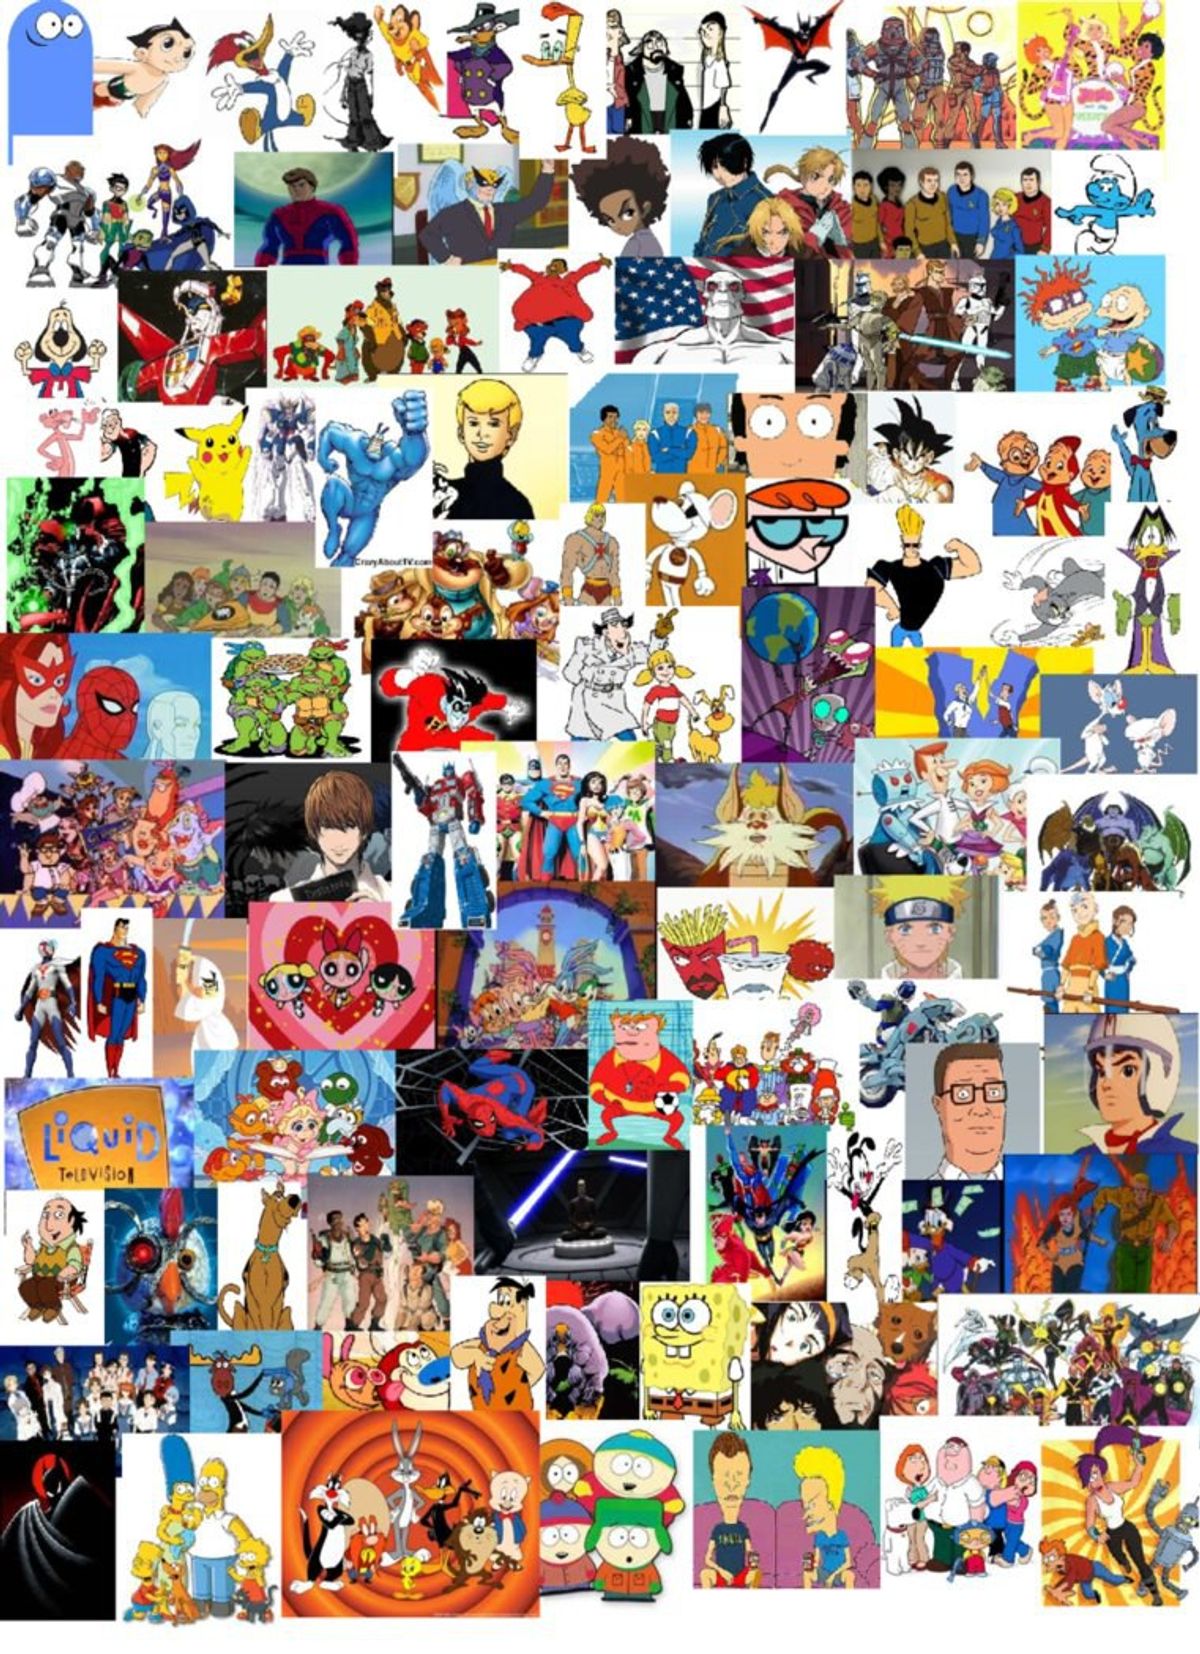 Top 10 Animated Shows Of All Time